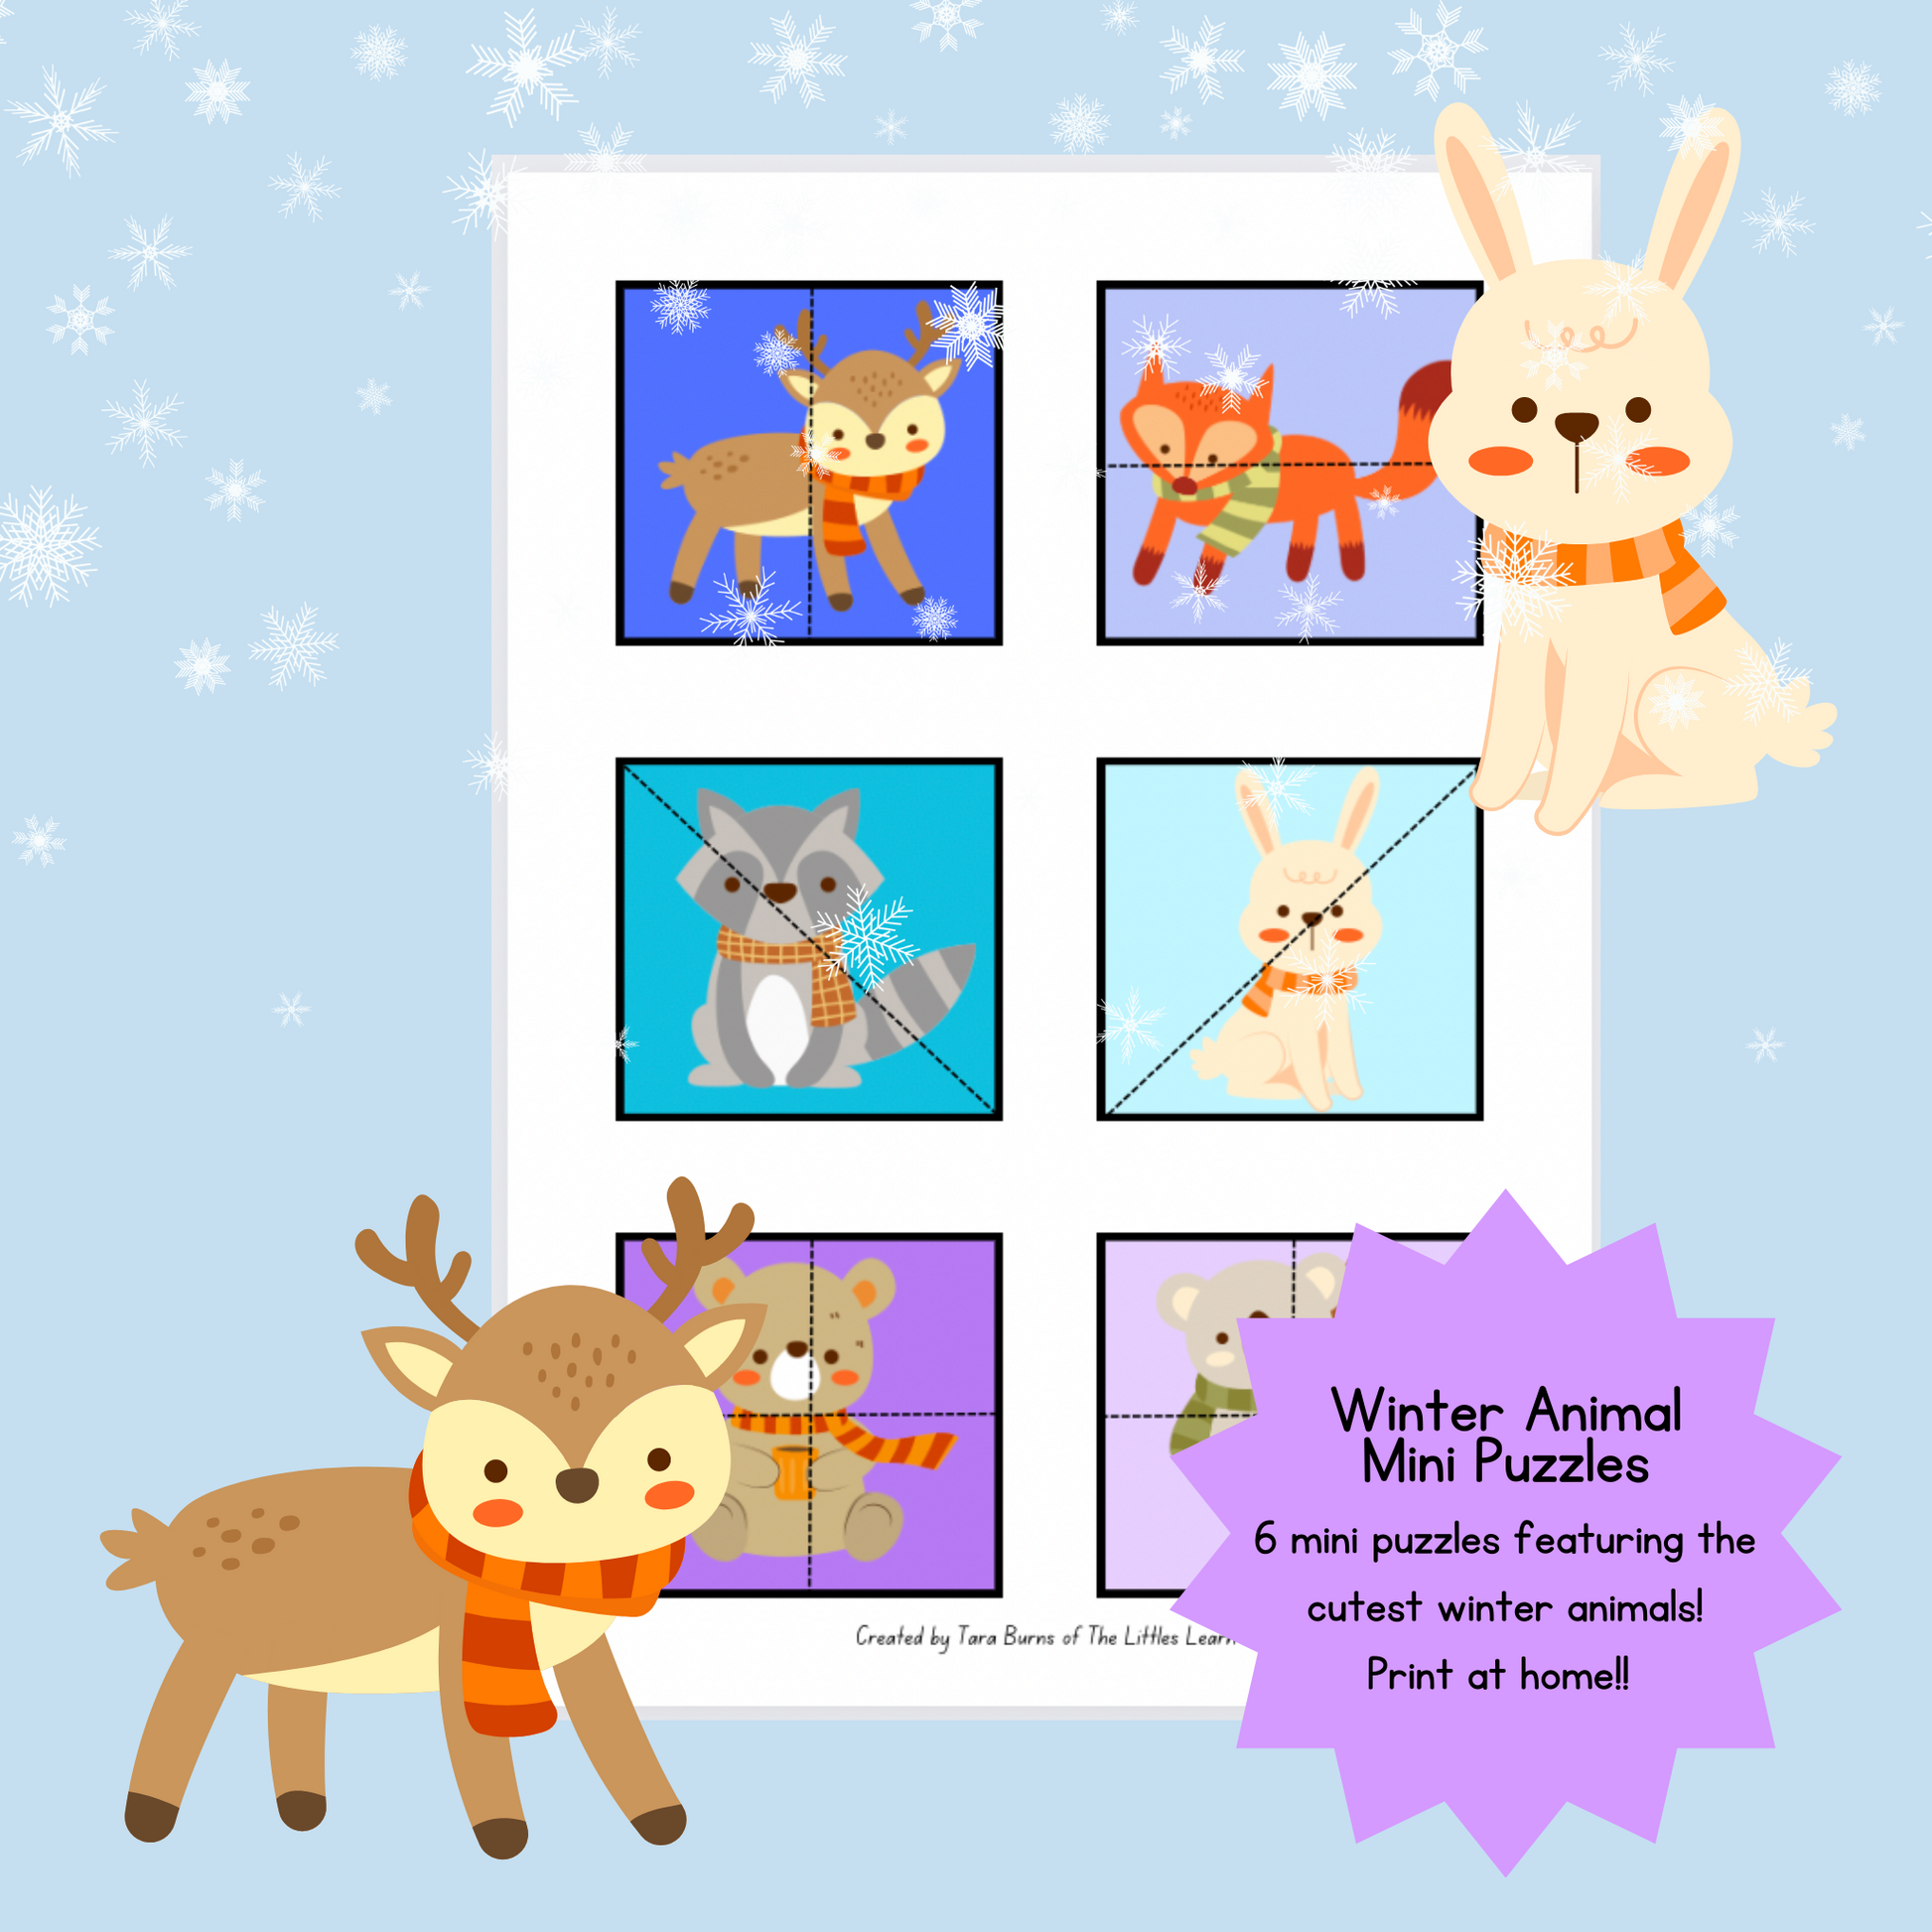 6 simple puzzles with cute winter animals wearing scarves!